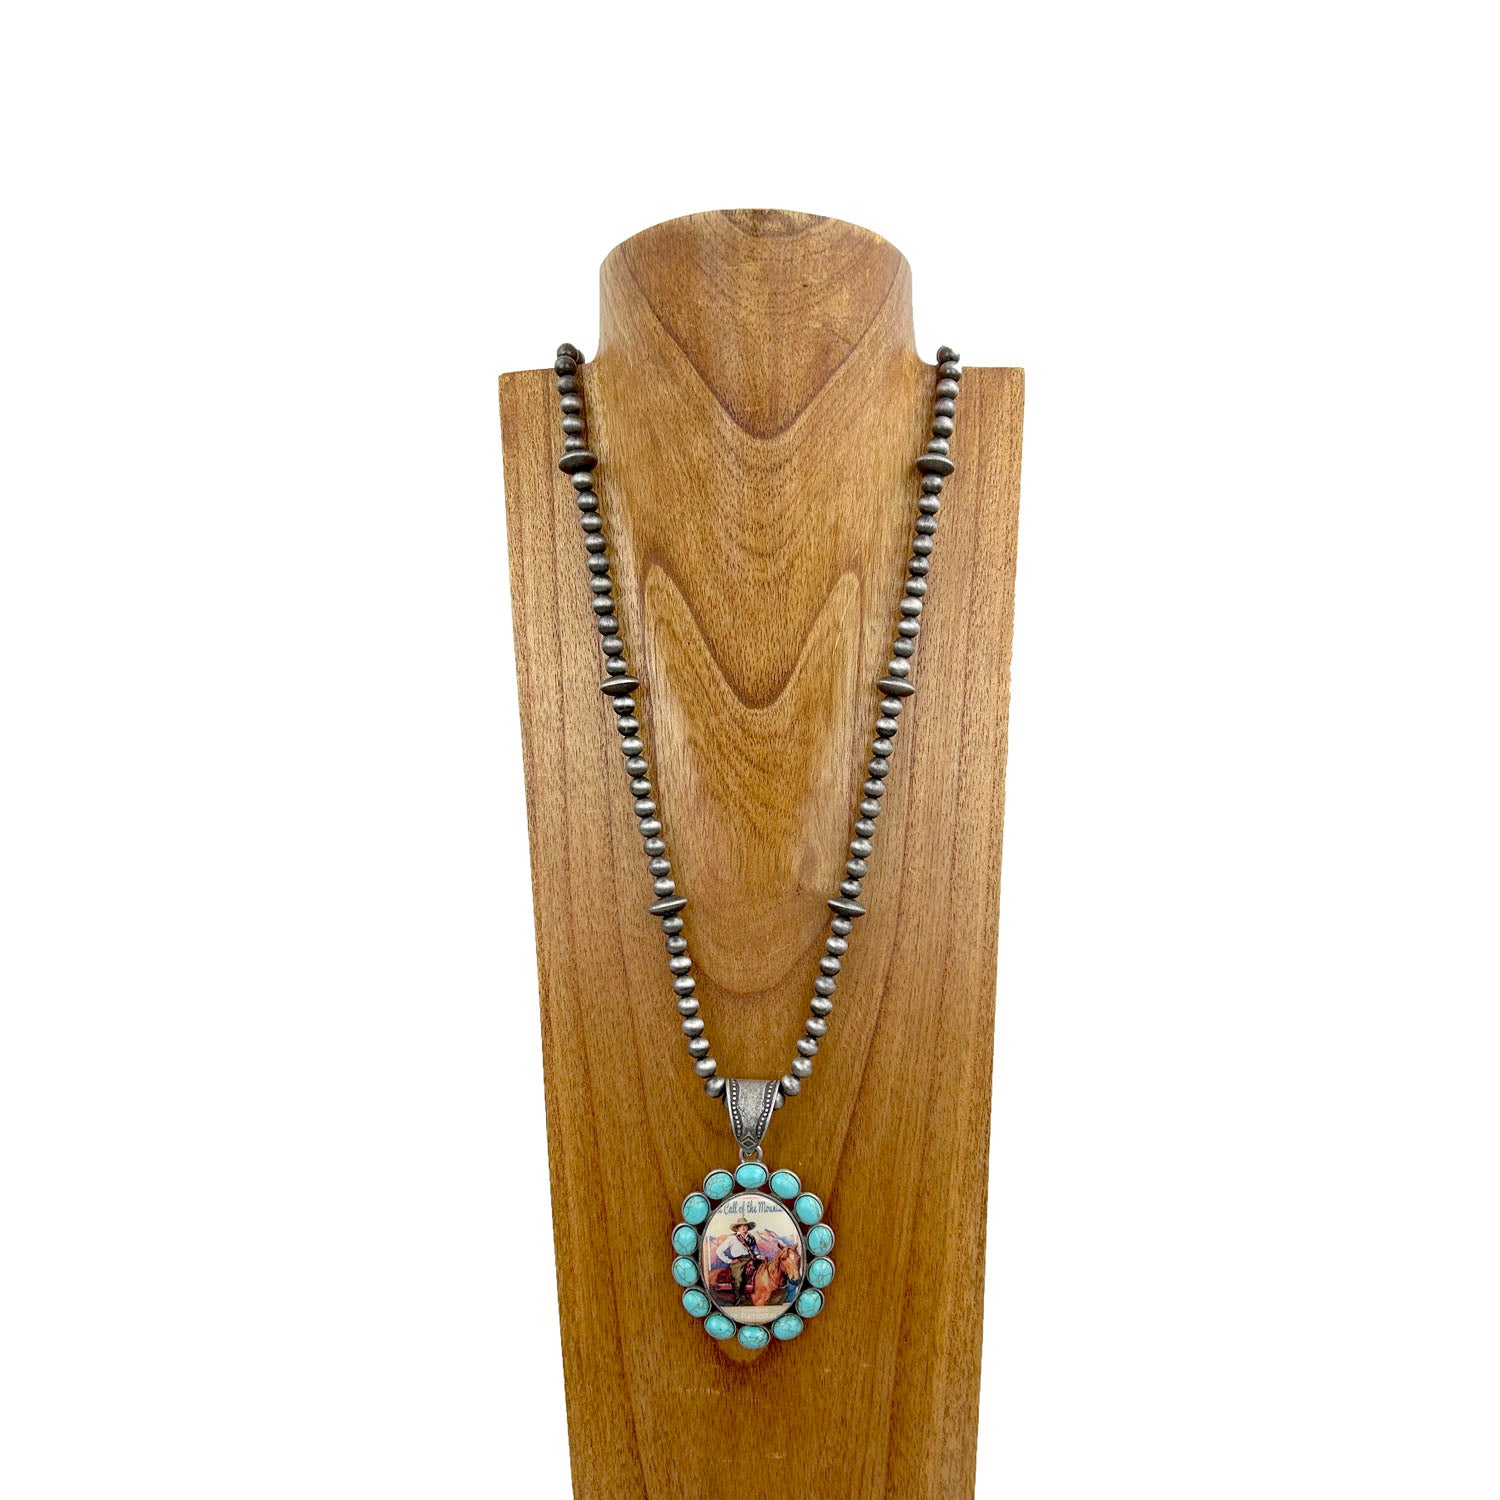 NKS230708-28	"36 Inches long silver Navajo pearl beads with blue turquoise  stone oval cowgirl pendant Necklace"